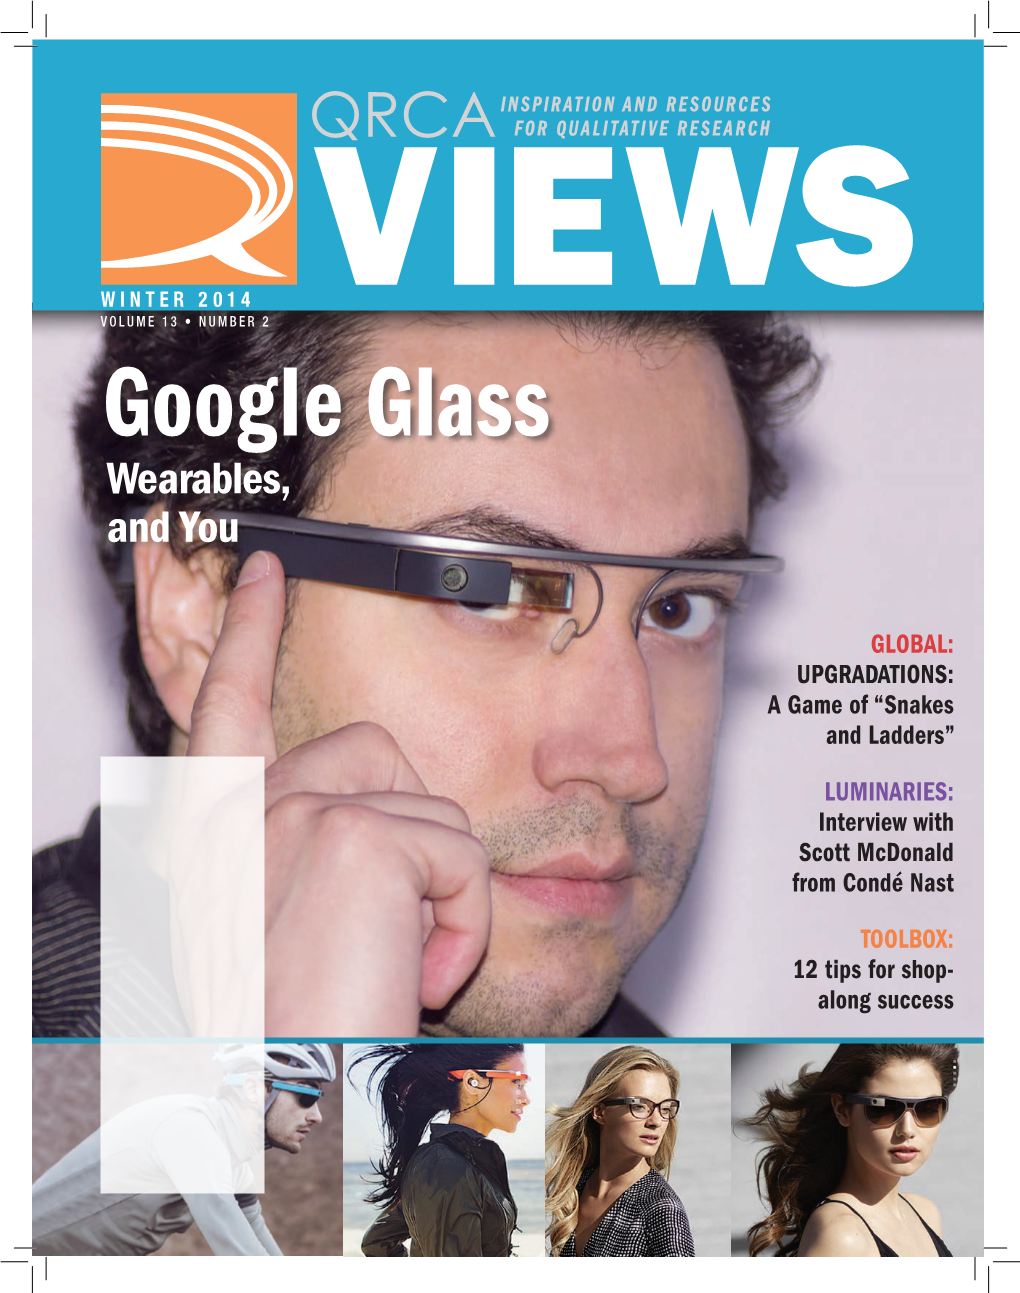 Google Glass Wearables, and You